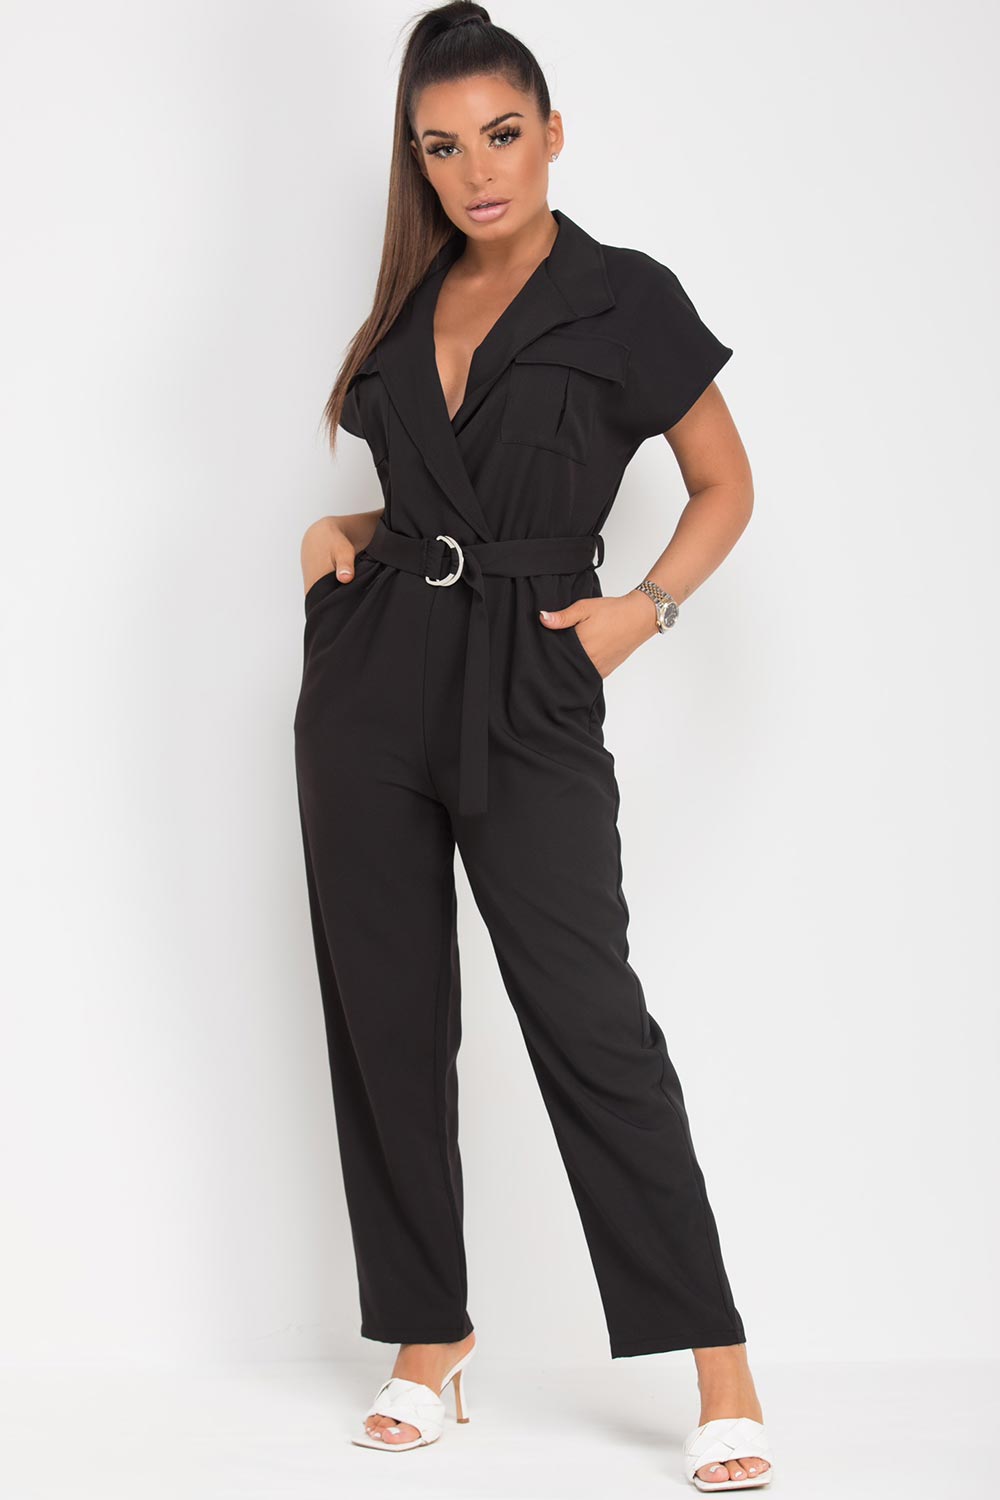 Womens Black Short Sleeve Jumpsuit with ...